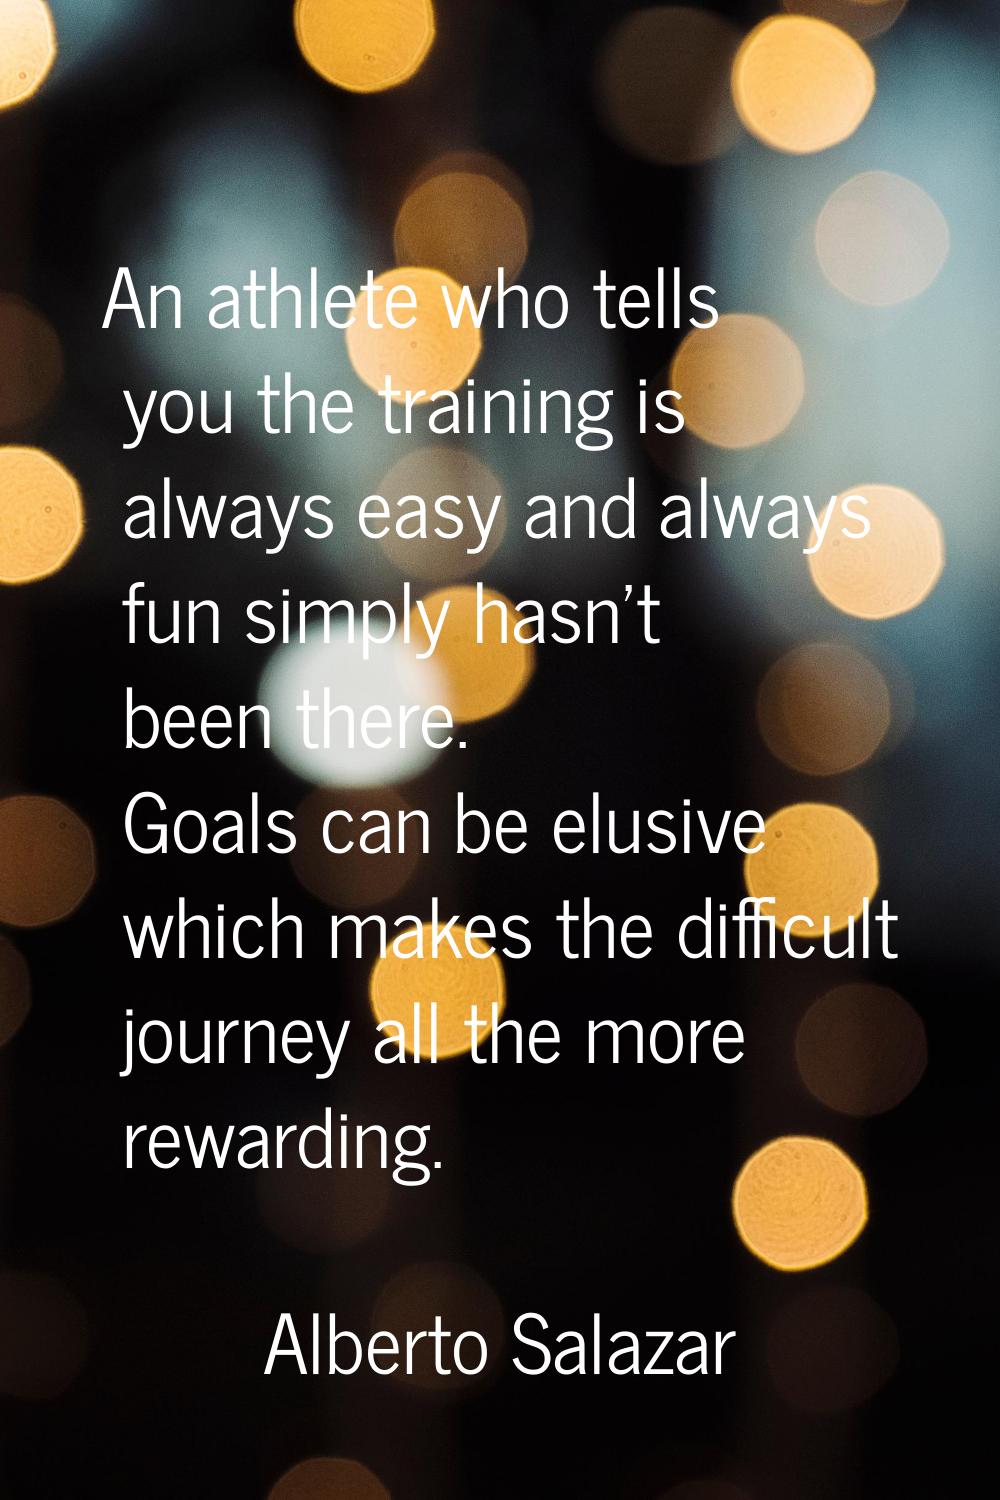 An athlete who tells you the training is always easy and always fun simply hasn't been there. Goals